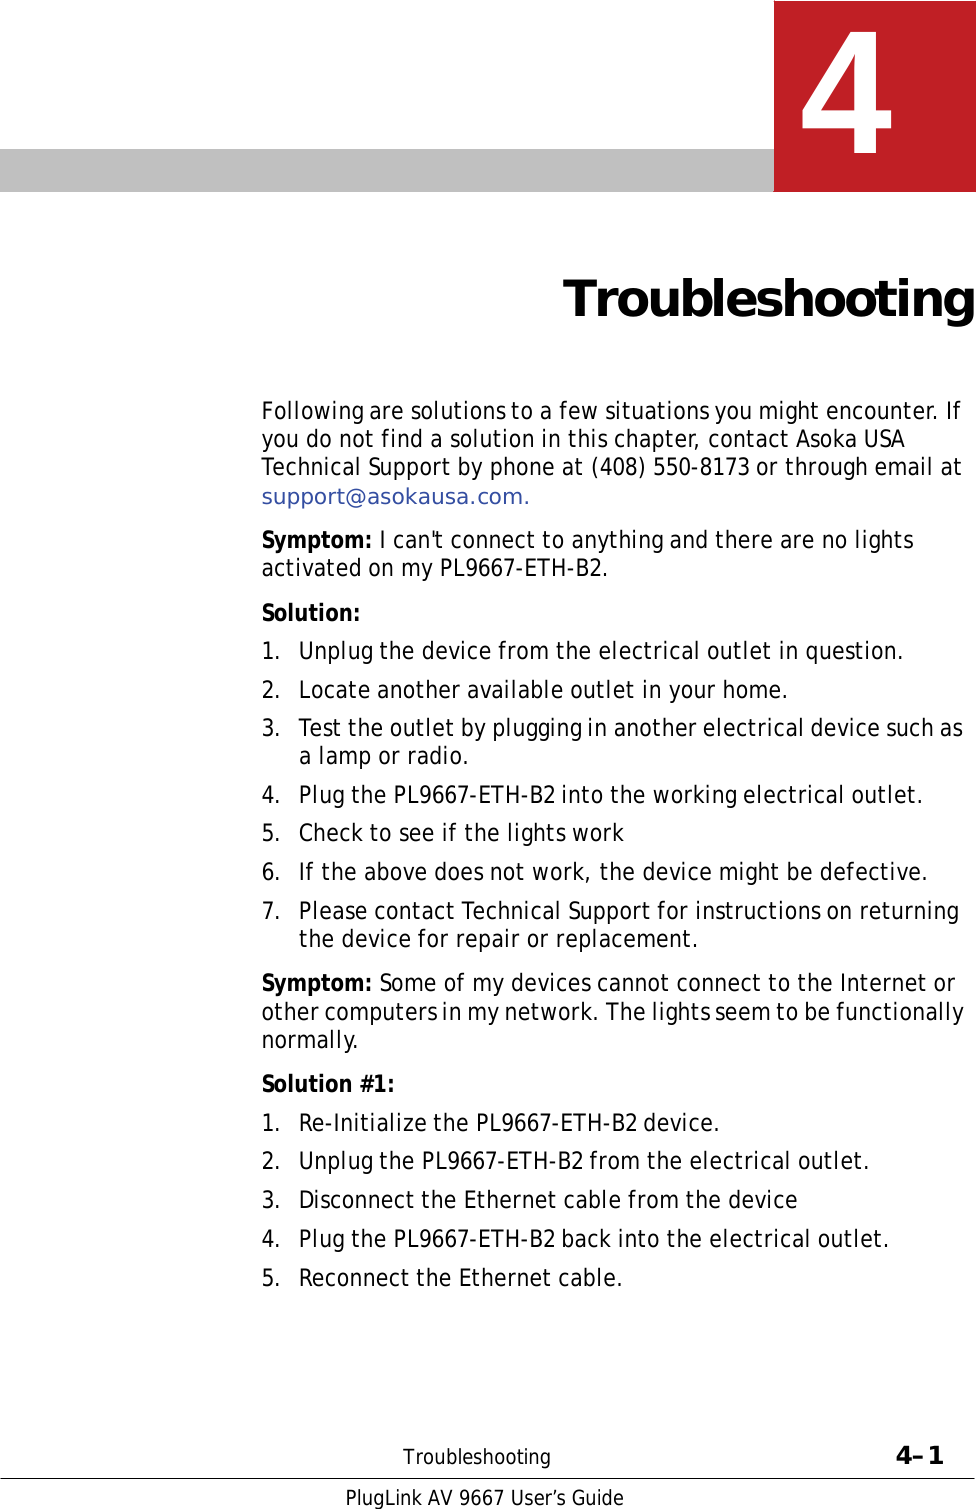   4    Troubleshooting    Following are solutions to a few situations you might encounter. If you do not find a solution in this chapter, contact Asoka USA Technical Support by phone at (408) 550-8173 or through email at support@asokausa.com.  Symptom: I can&apos;t connect to anything and there are no lights activated on my PL9667-ETH-B2.  Solution:  1.  Unplug the device from the electrical outlet in question.  2.  Locate another available outlet in your home.  3.  Test the outlet by plugging in another electrical device such as a lamp or radio. 4.  Plug the PL9667-ETH-B2 into the working electrical outlet.  5.  Check to see if the lights work  6.  If the above does not work, the device might be defective.  7.  Please contact Technical Support for instructions on returning the device for repair or replacement.  Symptom: Some of my devices cannot connect to the Internet or other computers in my network. The lights seem to be functionally normally.  Solution #1:  1.  Re-Initialize the PL9667-ETH-B2 device.  2.  Unplug the PL9667-ETH-B2 from the electrical outlet.  3.  Disconnect the Ethernet cable from the device  4.  Plug the PL9667-ETH-B2 back into the electrical outlet.  5.  Reconnect the Ethernet cable.        Troubleshooting  4–1  PlugLink AV 9667 User’s Guide 